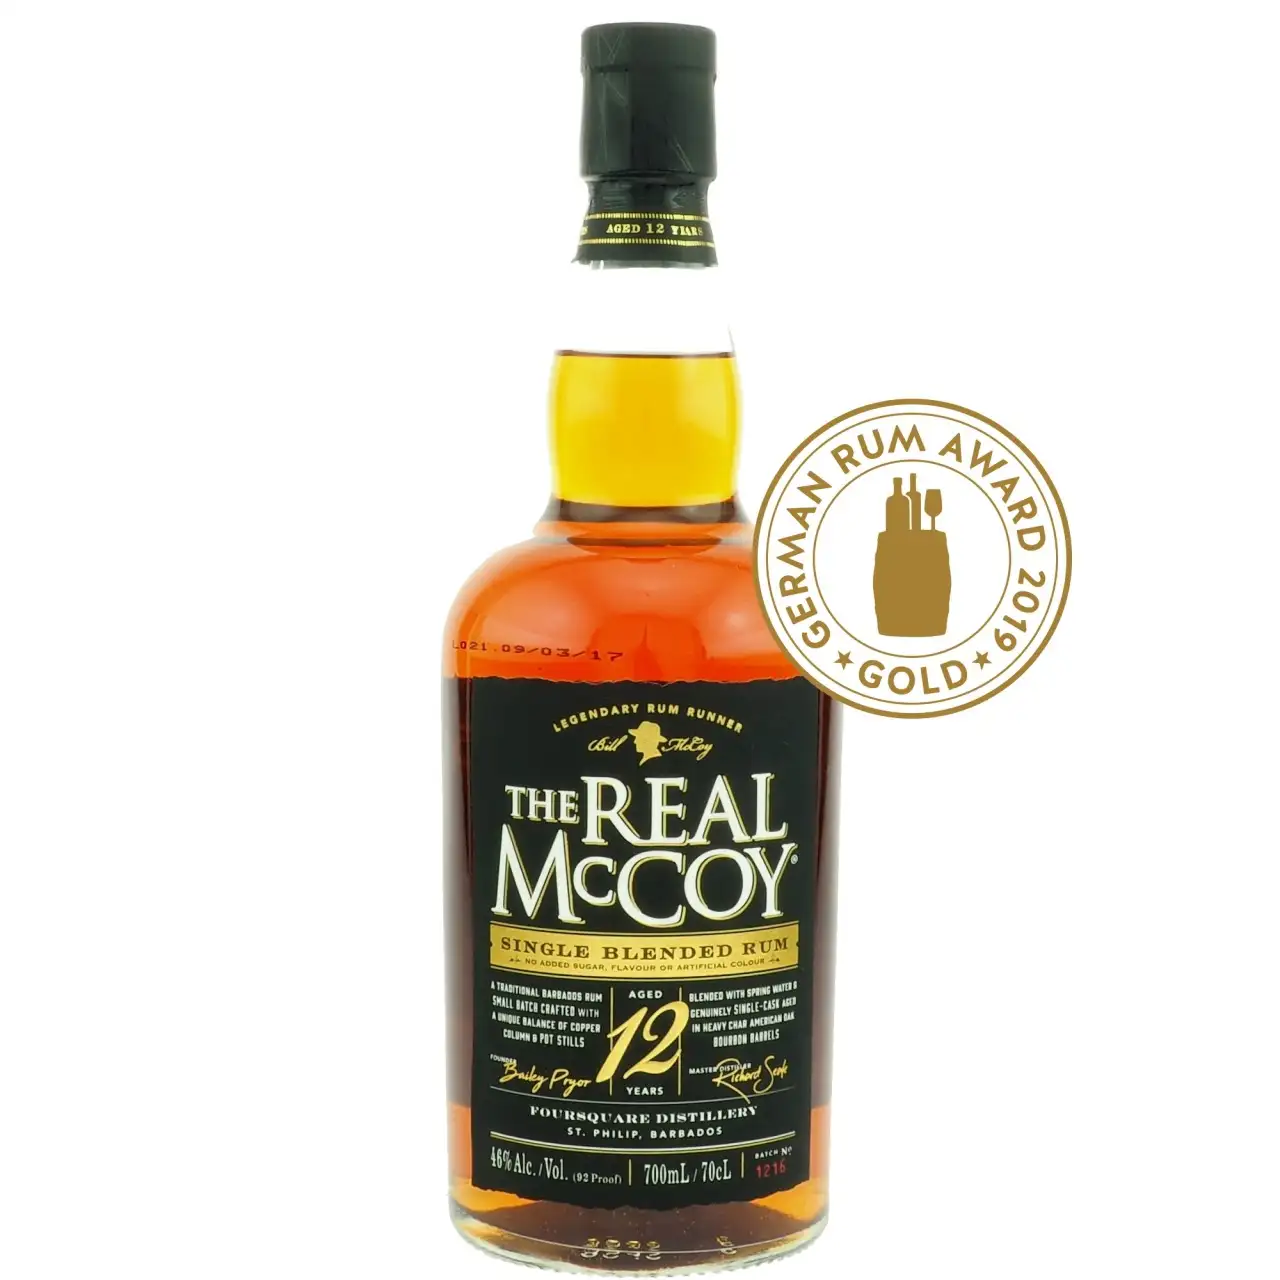 Image of the front of the bottle of the rum The Real McCoy 12 Years